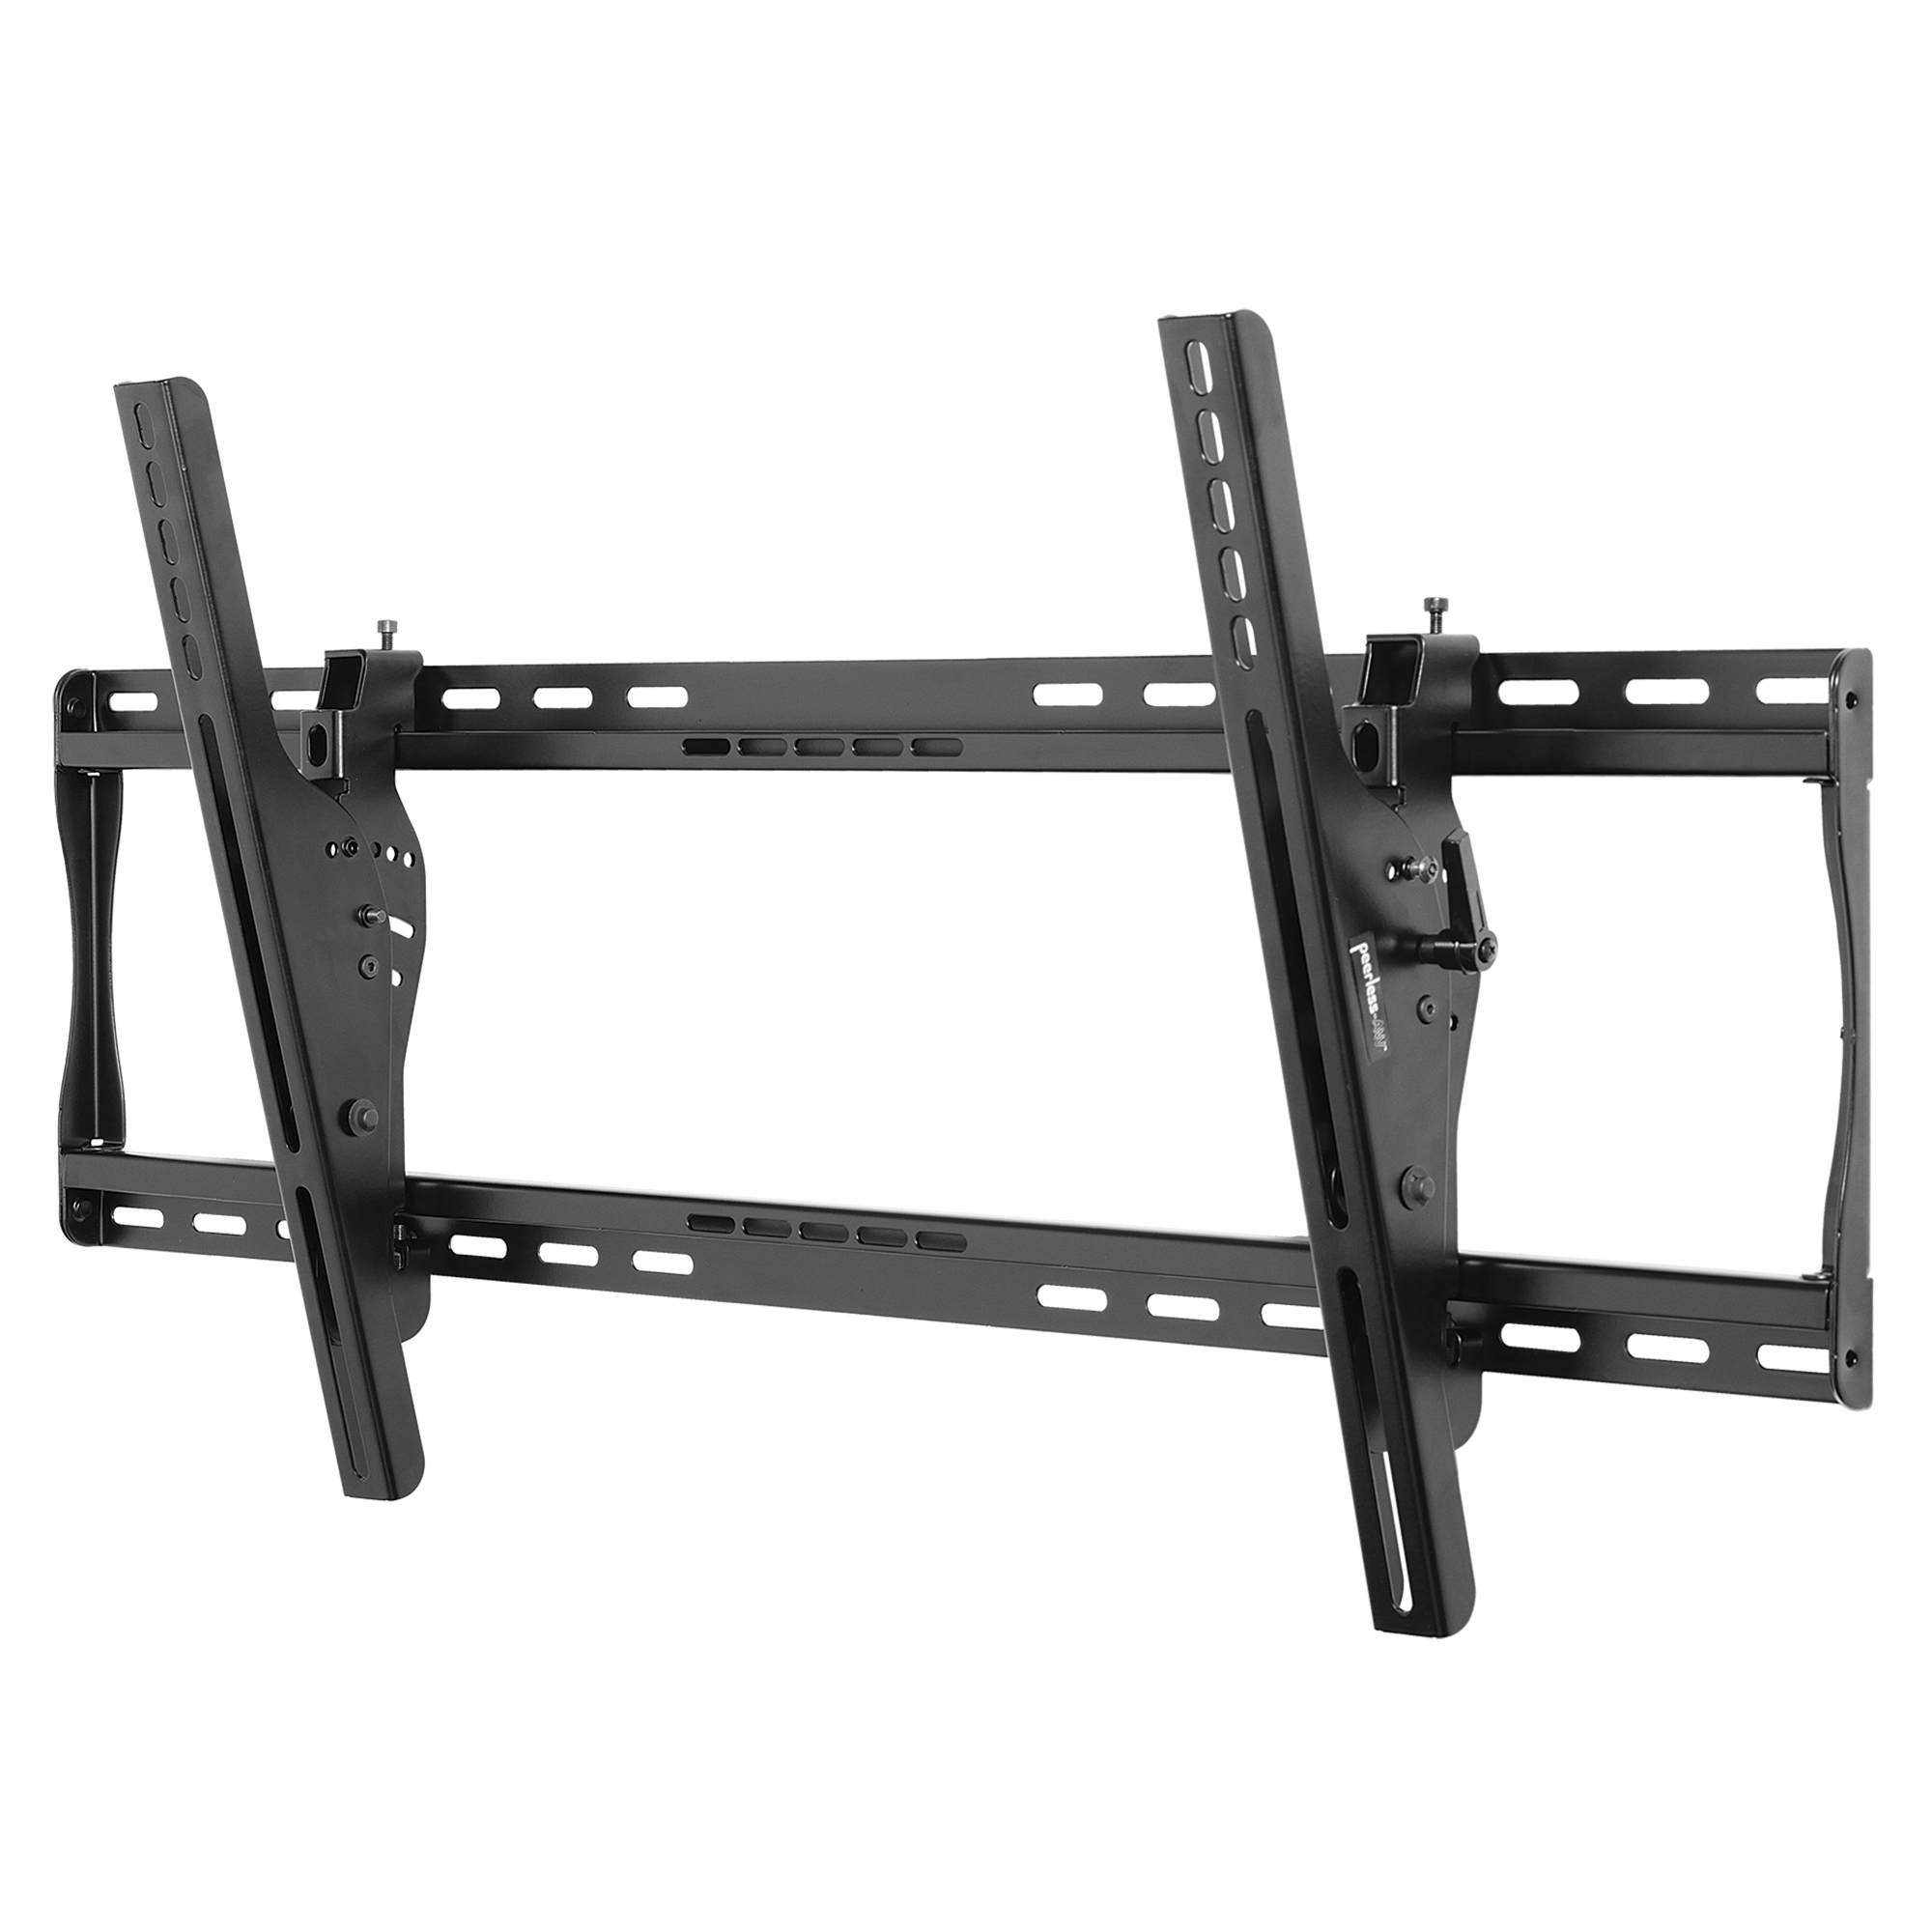 Peerless SmartMount , Universal 39Inch to 80Inch Tilt Wall Mount, Capacity 200 lb, Material Metal, Color Finish Black, Model ST660P